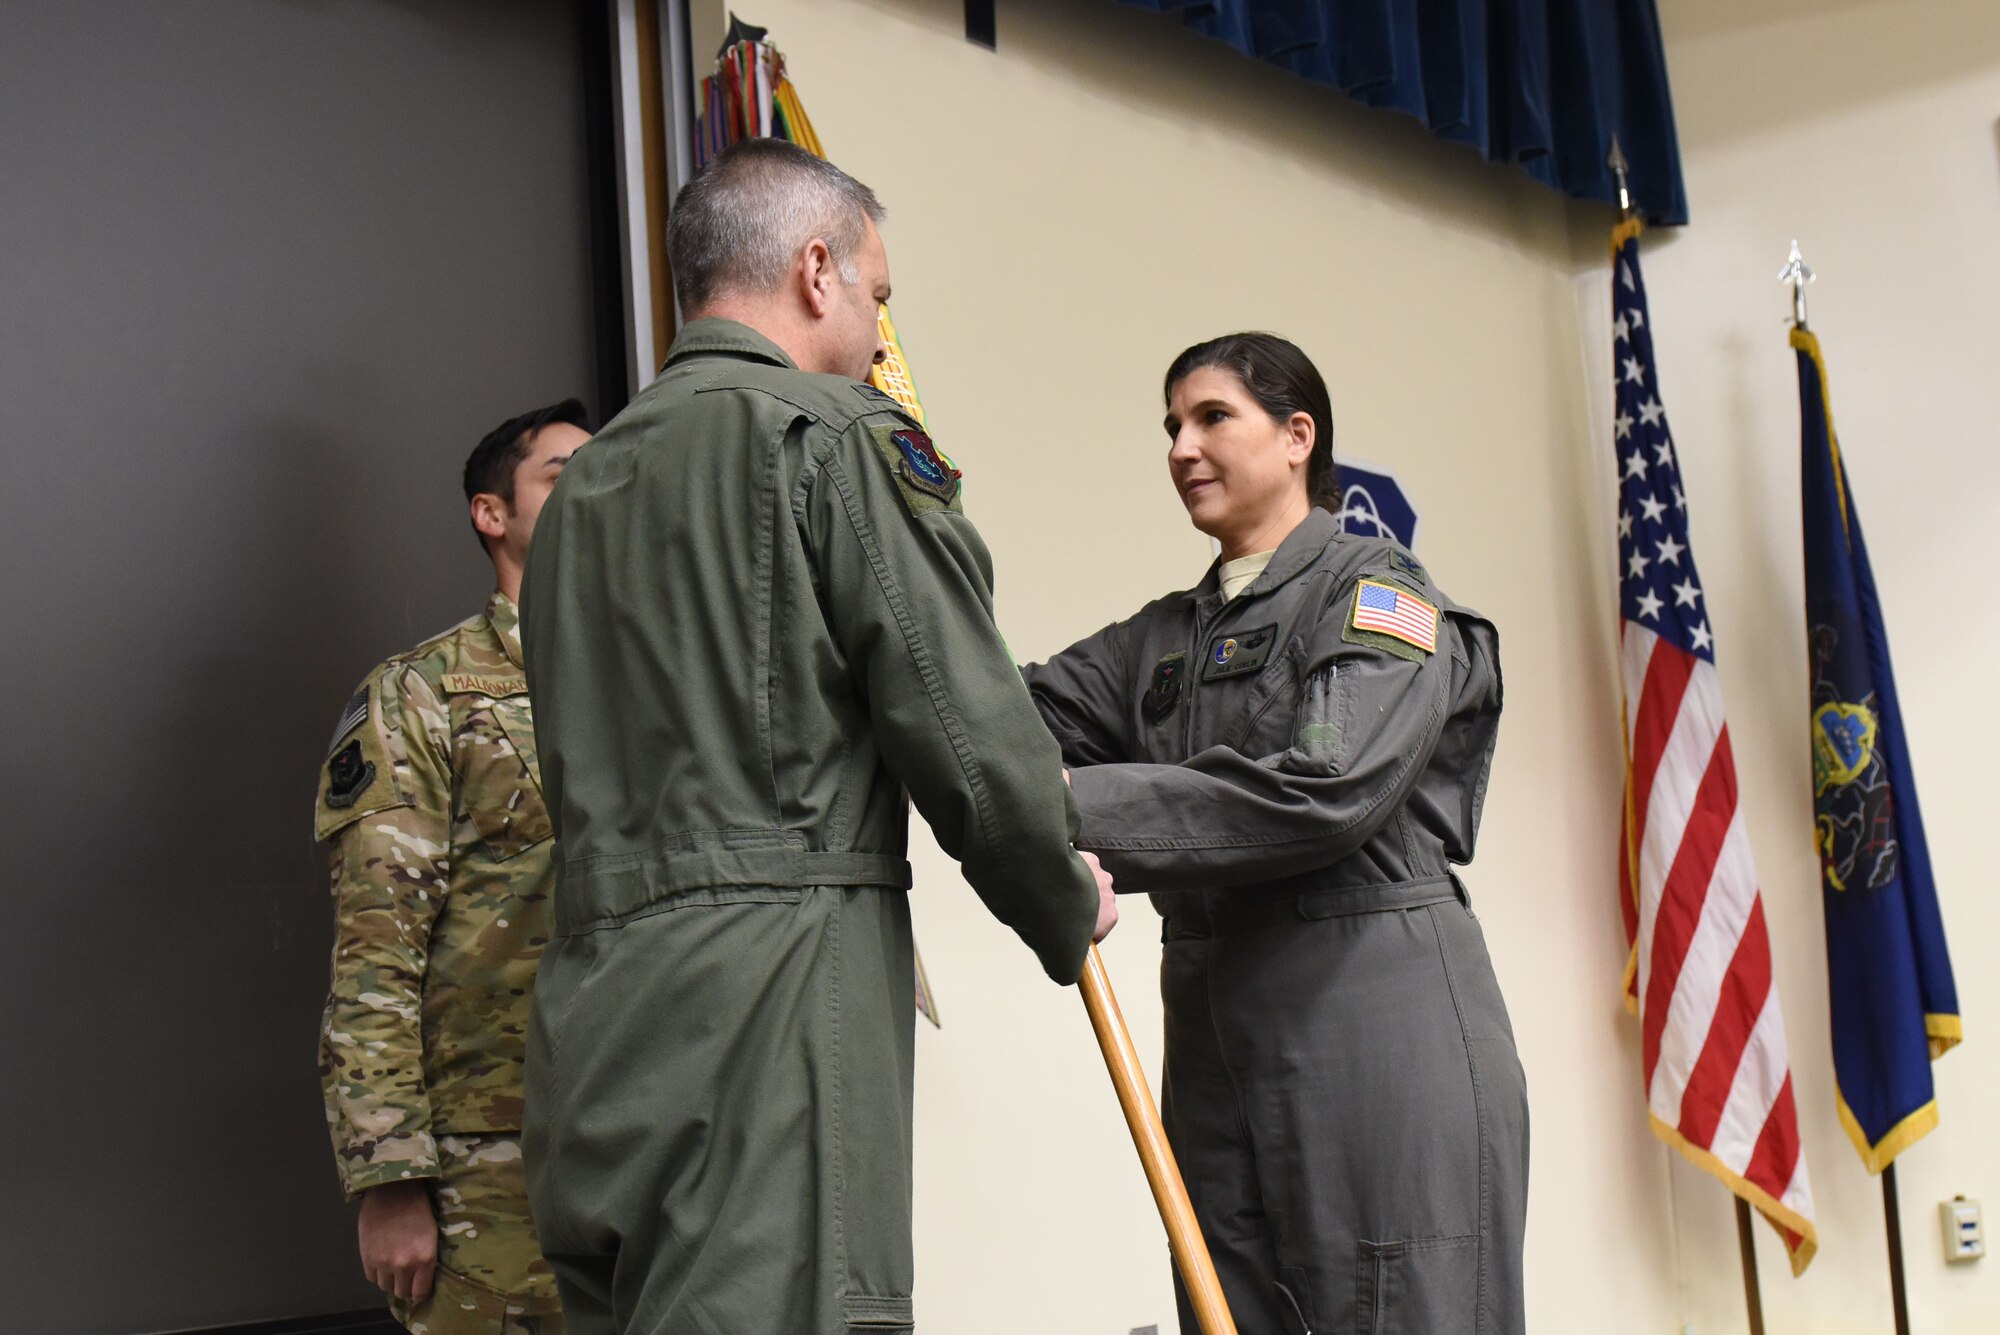 U.S. Air Force Col. Julie Curlin, 193rd Special Operations Group commander, Pennsylvania Air National Guard, accepts the guidon from Col. Mike Cason, 193rd Special Operations Wing commander, during an assumption of command ceremony Feb. 11, 2018, in Middletown, Pennsylvania. The ceremony began with preliminary honors and ended with the symbolic passing of the guidon. (U.S. Air National Guard photo by Senior Airman Juila Sorber/Released)